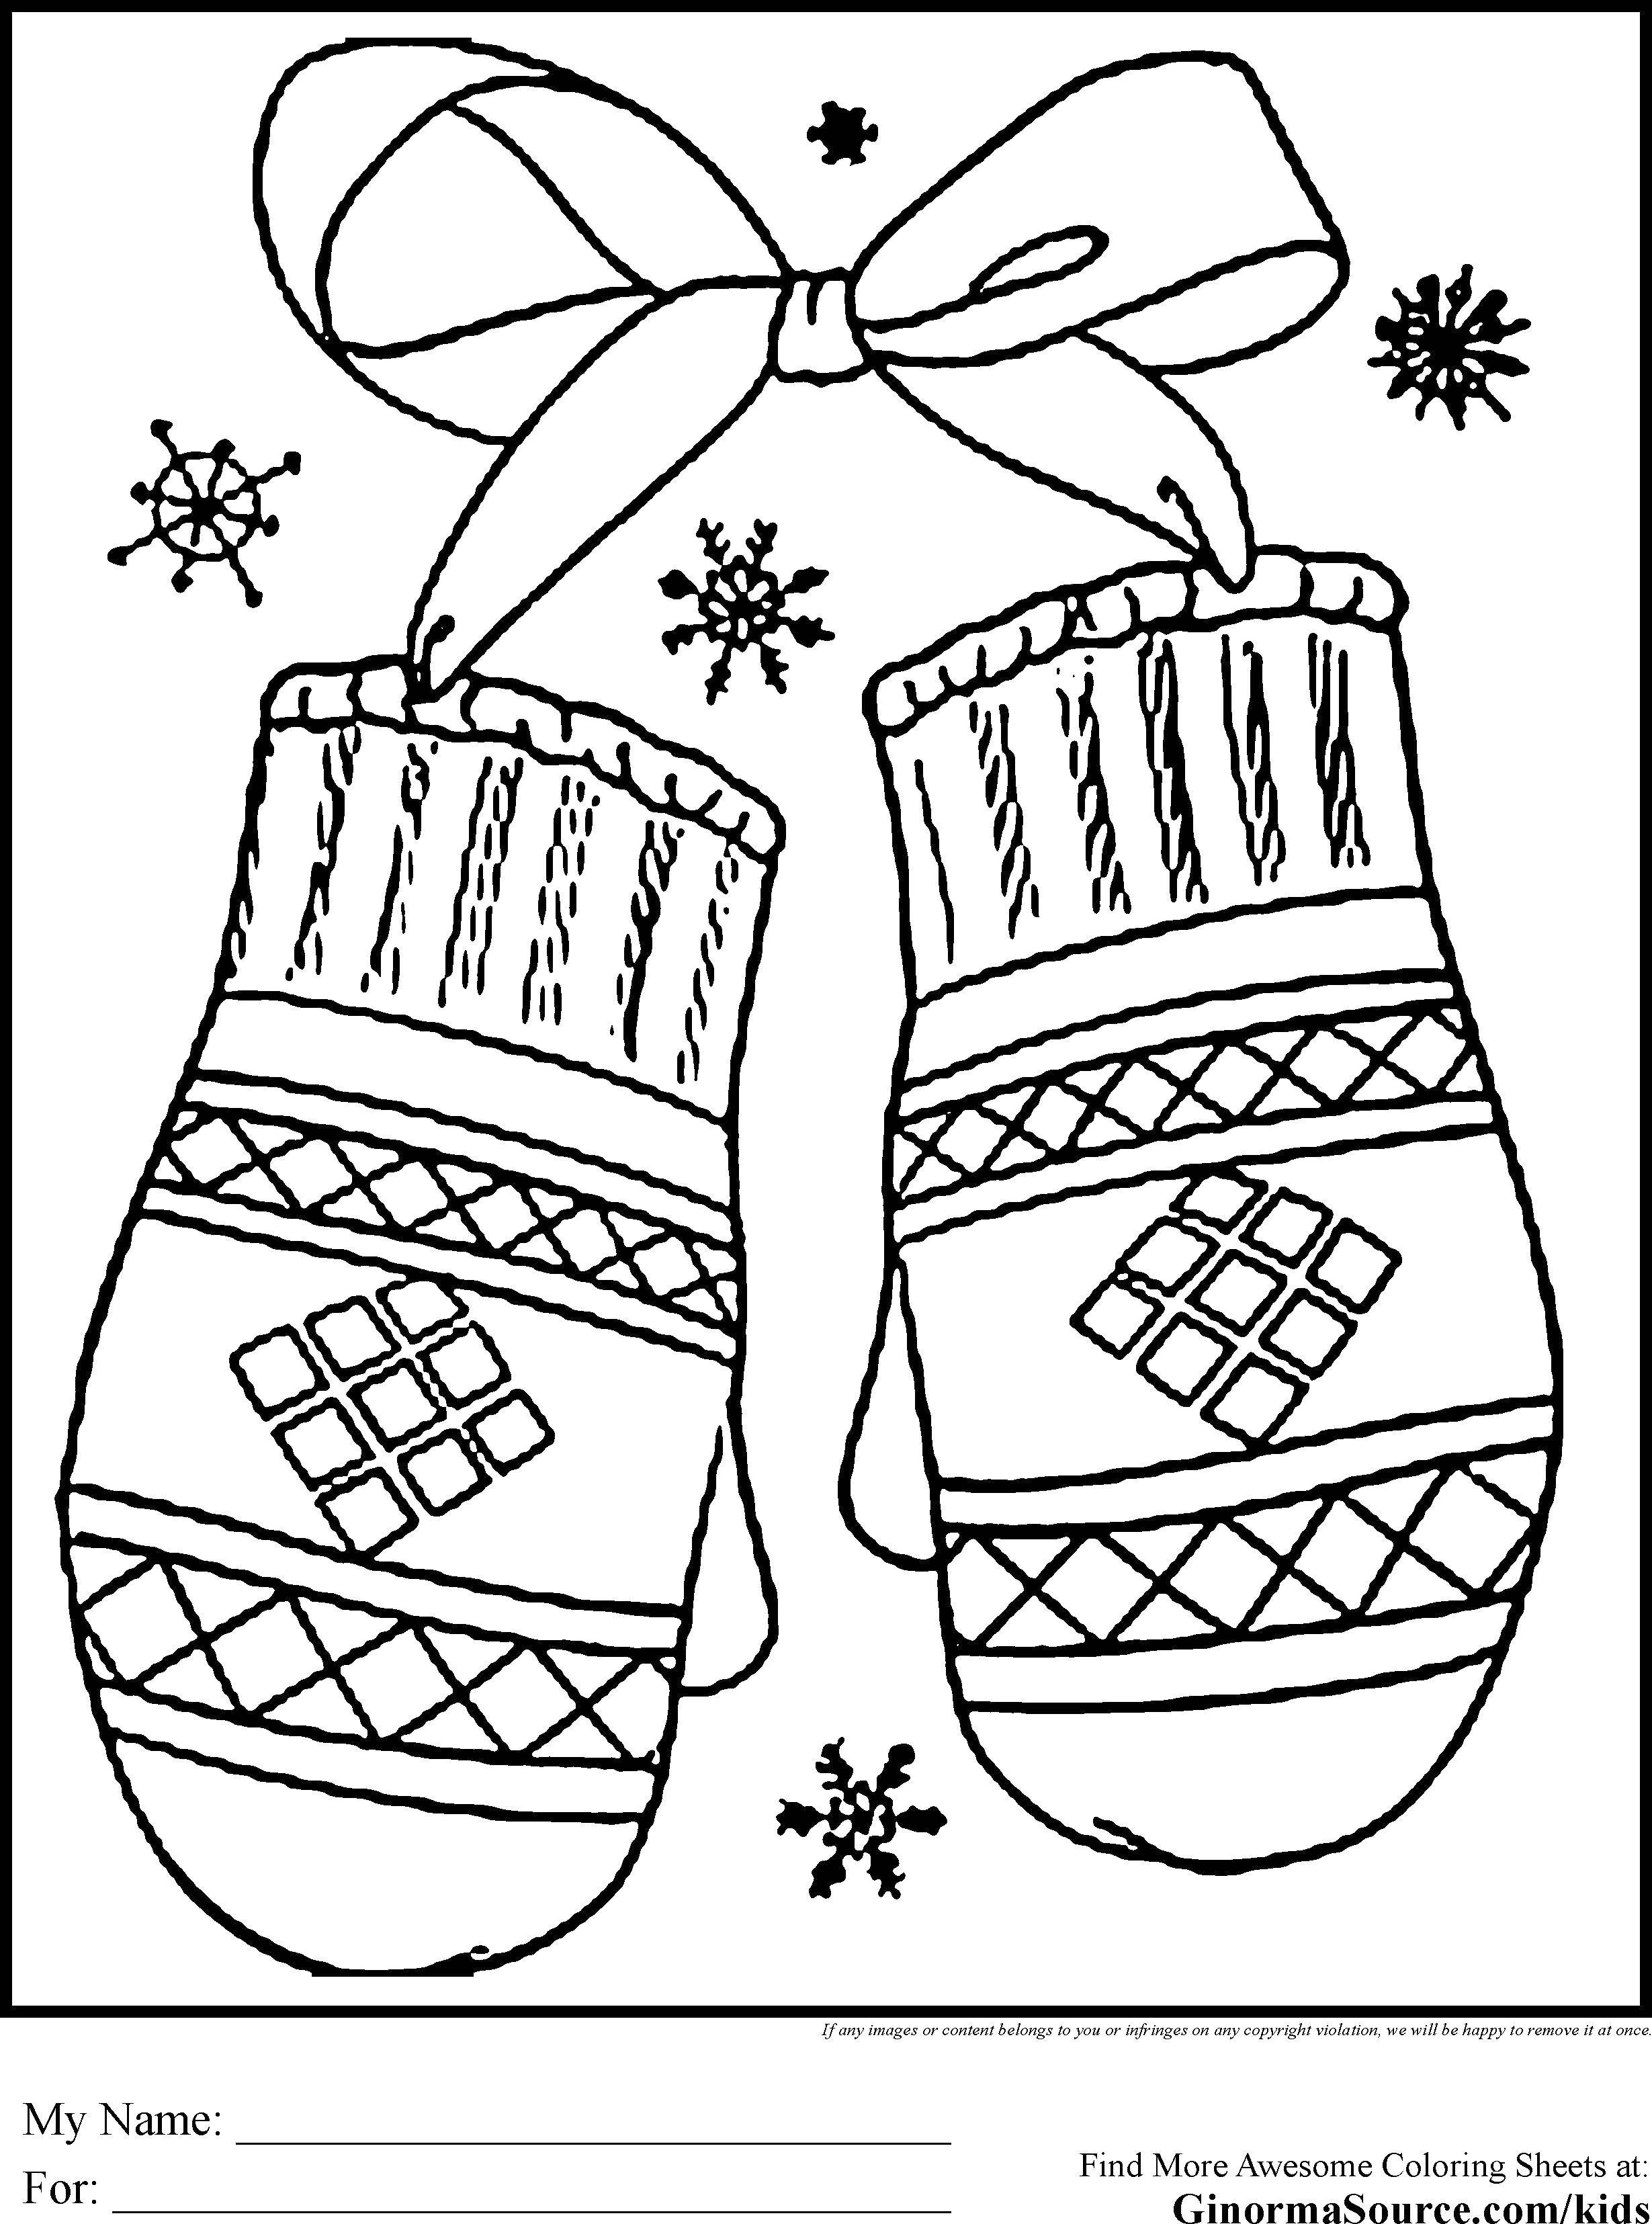 Coloring Mittens and snowflakes. Category winter. Tags:  mittens, snowflakes, bow.